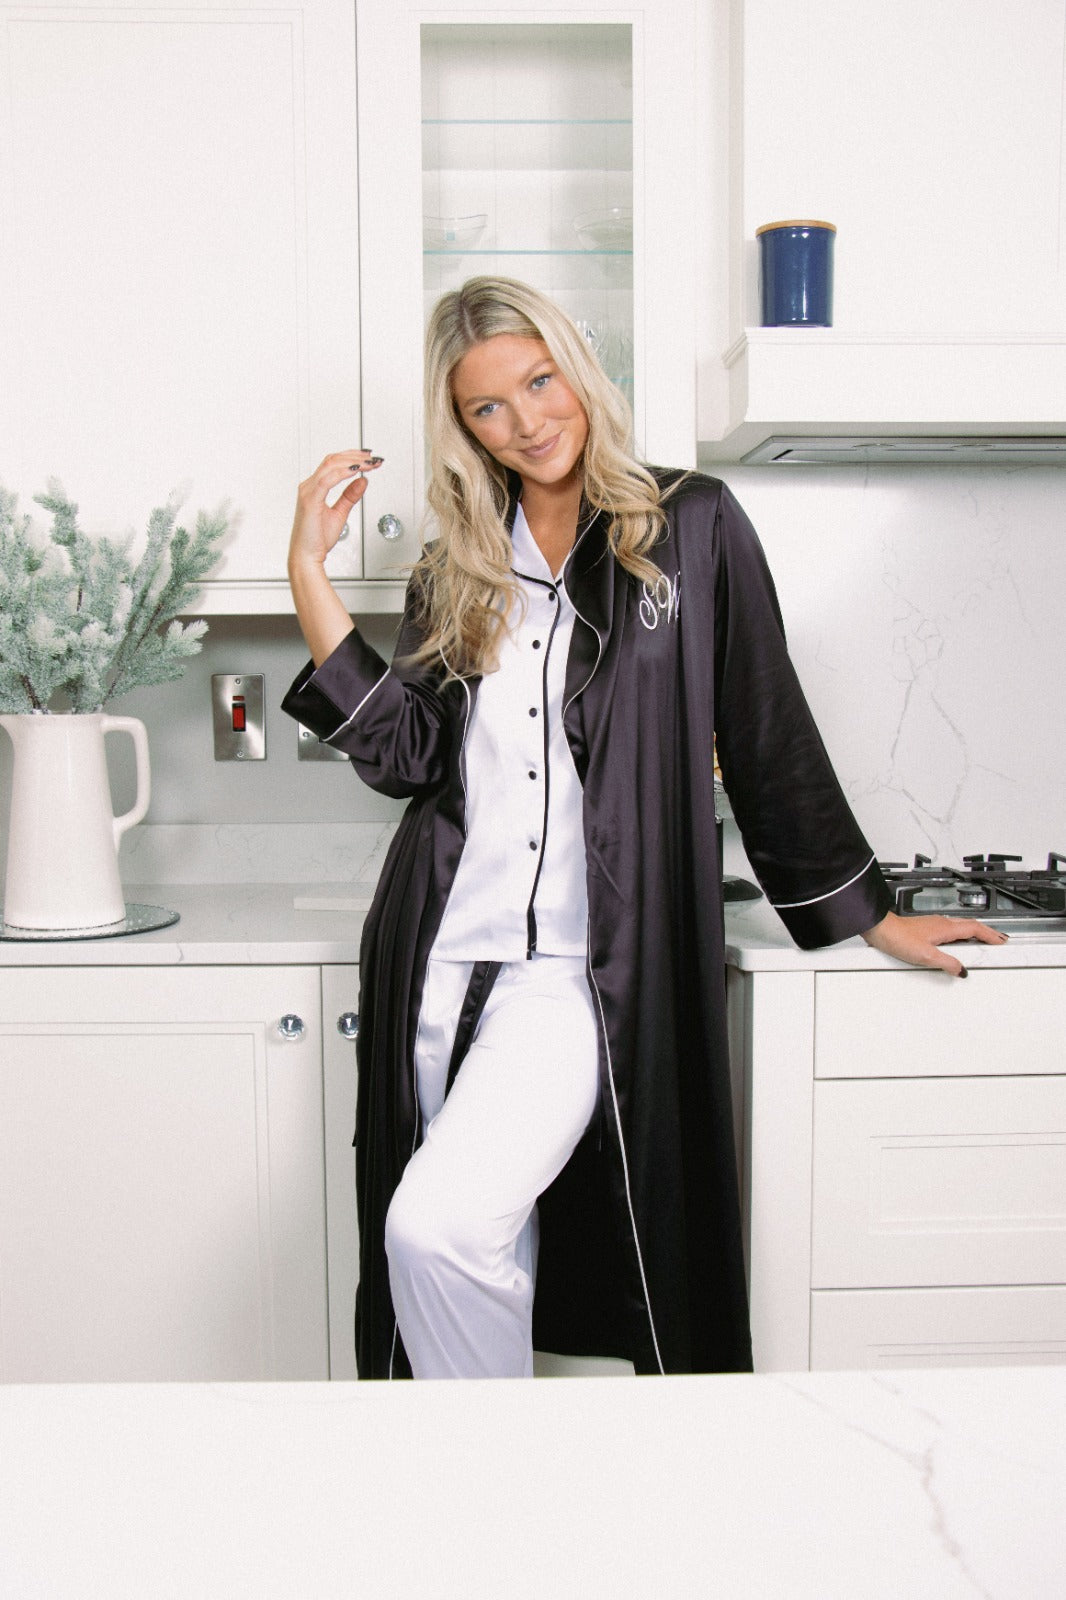 Long luxurious Silky Feel Black Satin full length Robe with piping and matching long pjs set